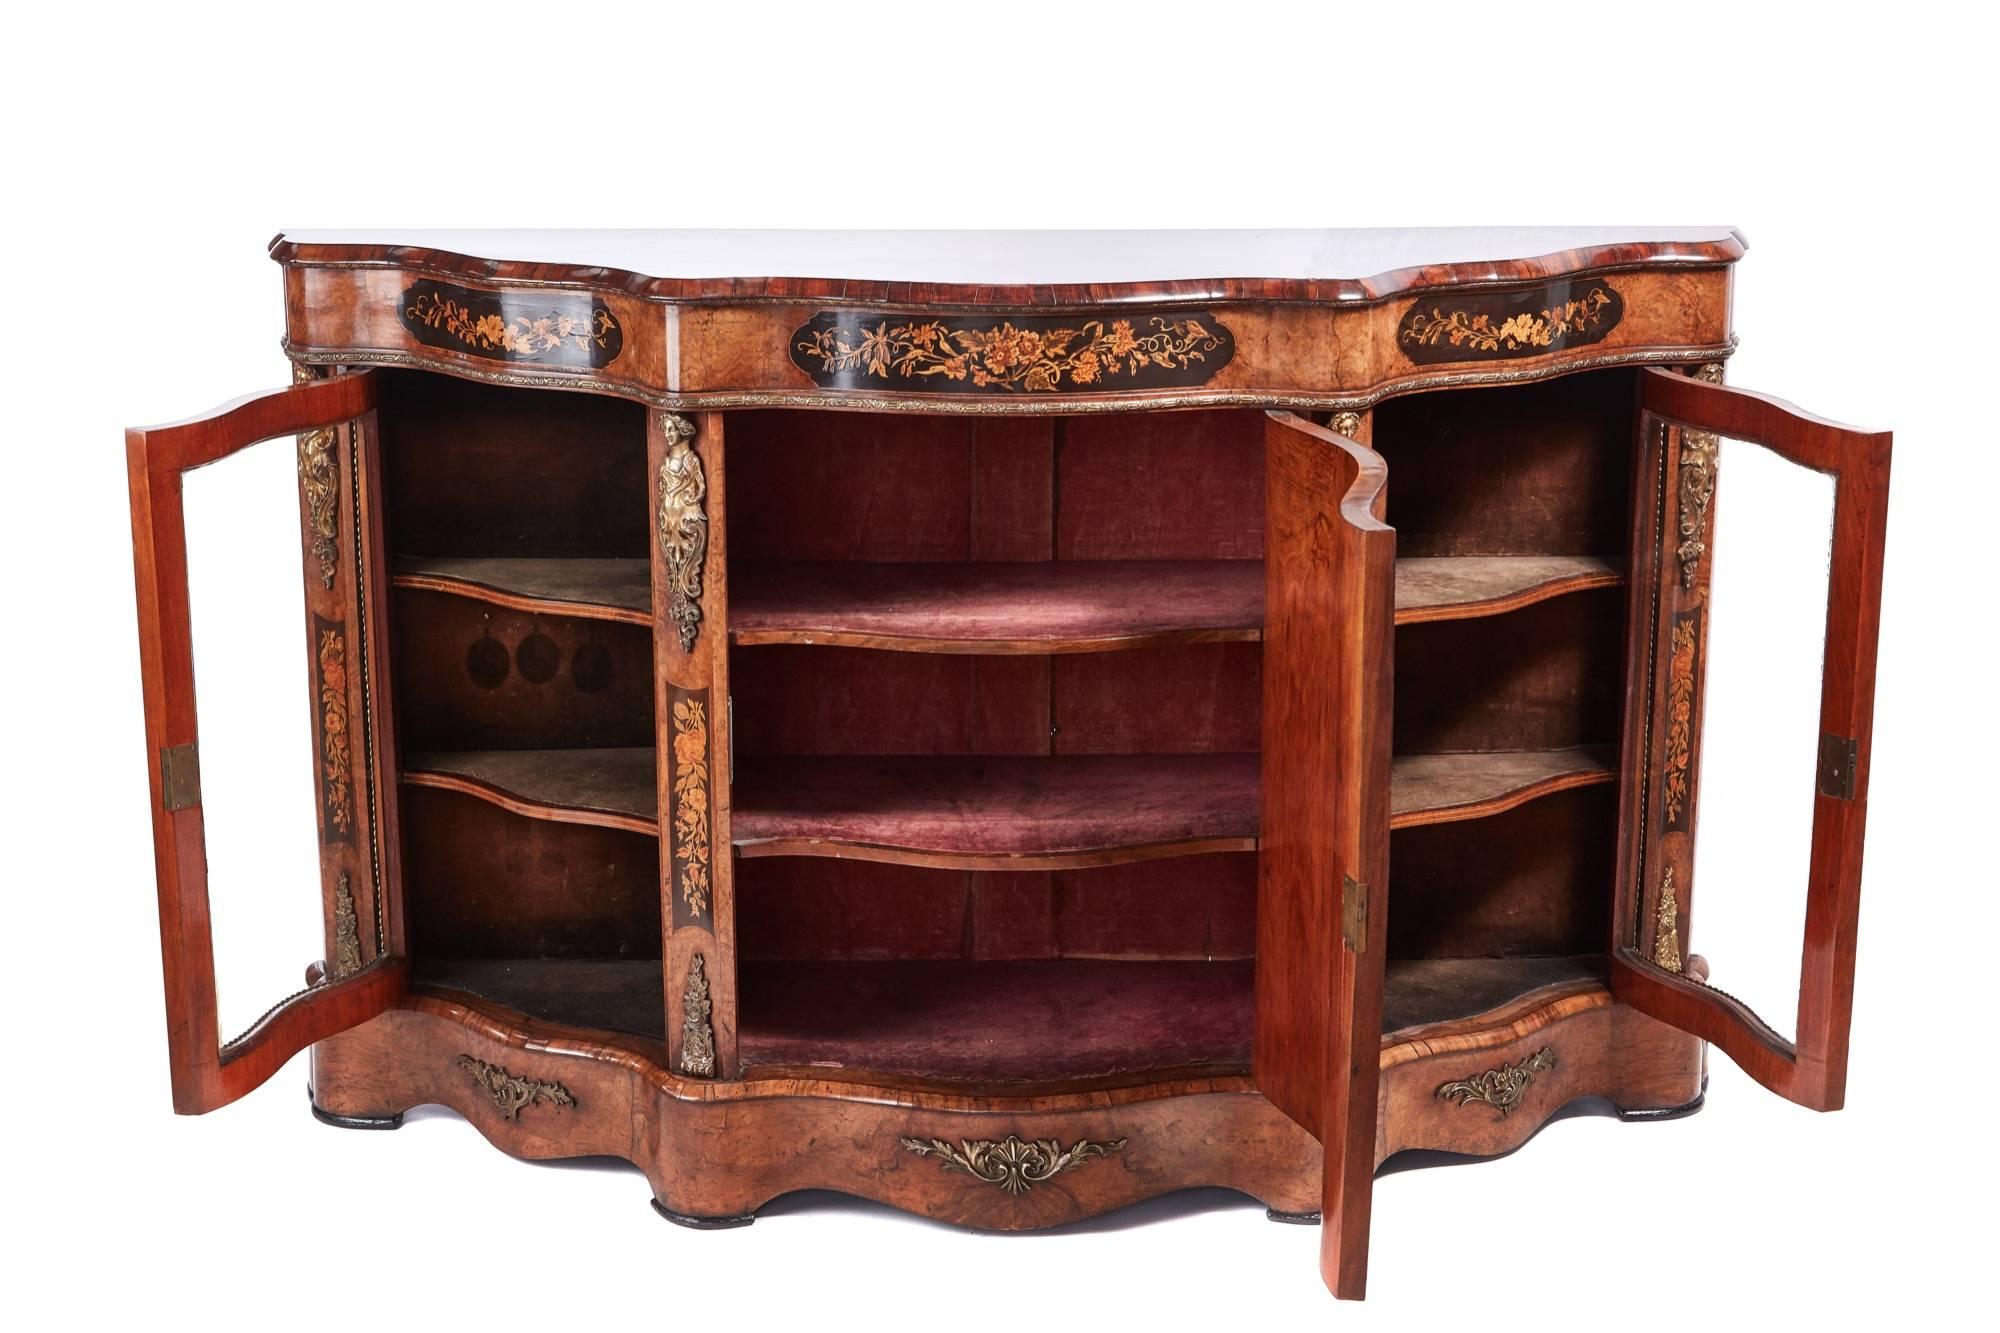 European Fantastic Quality Antique Victorian Burr Walnut Floral Marquetry Credenza For Sale